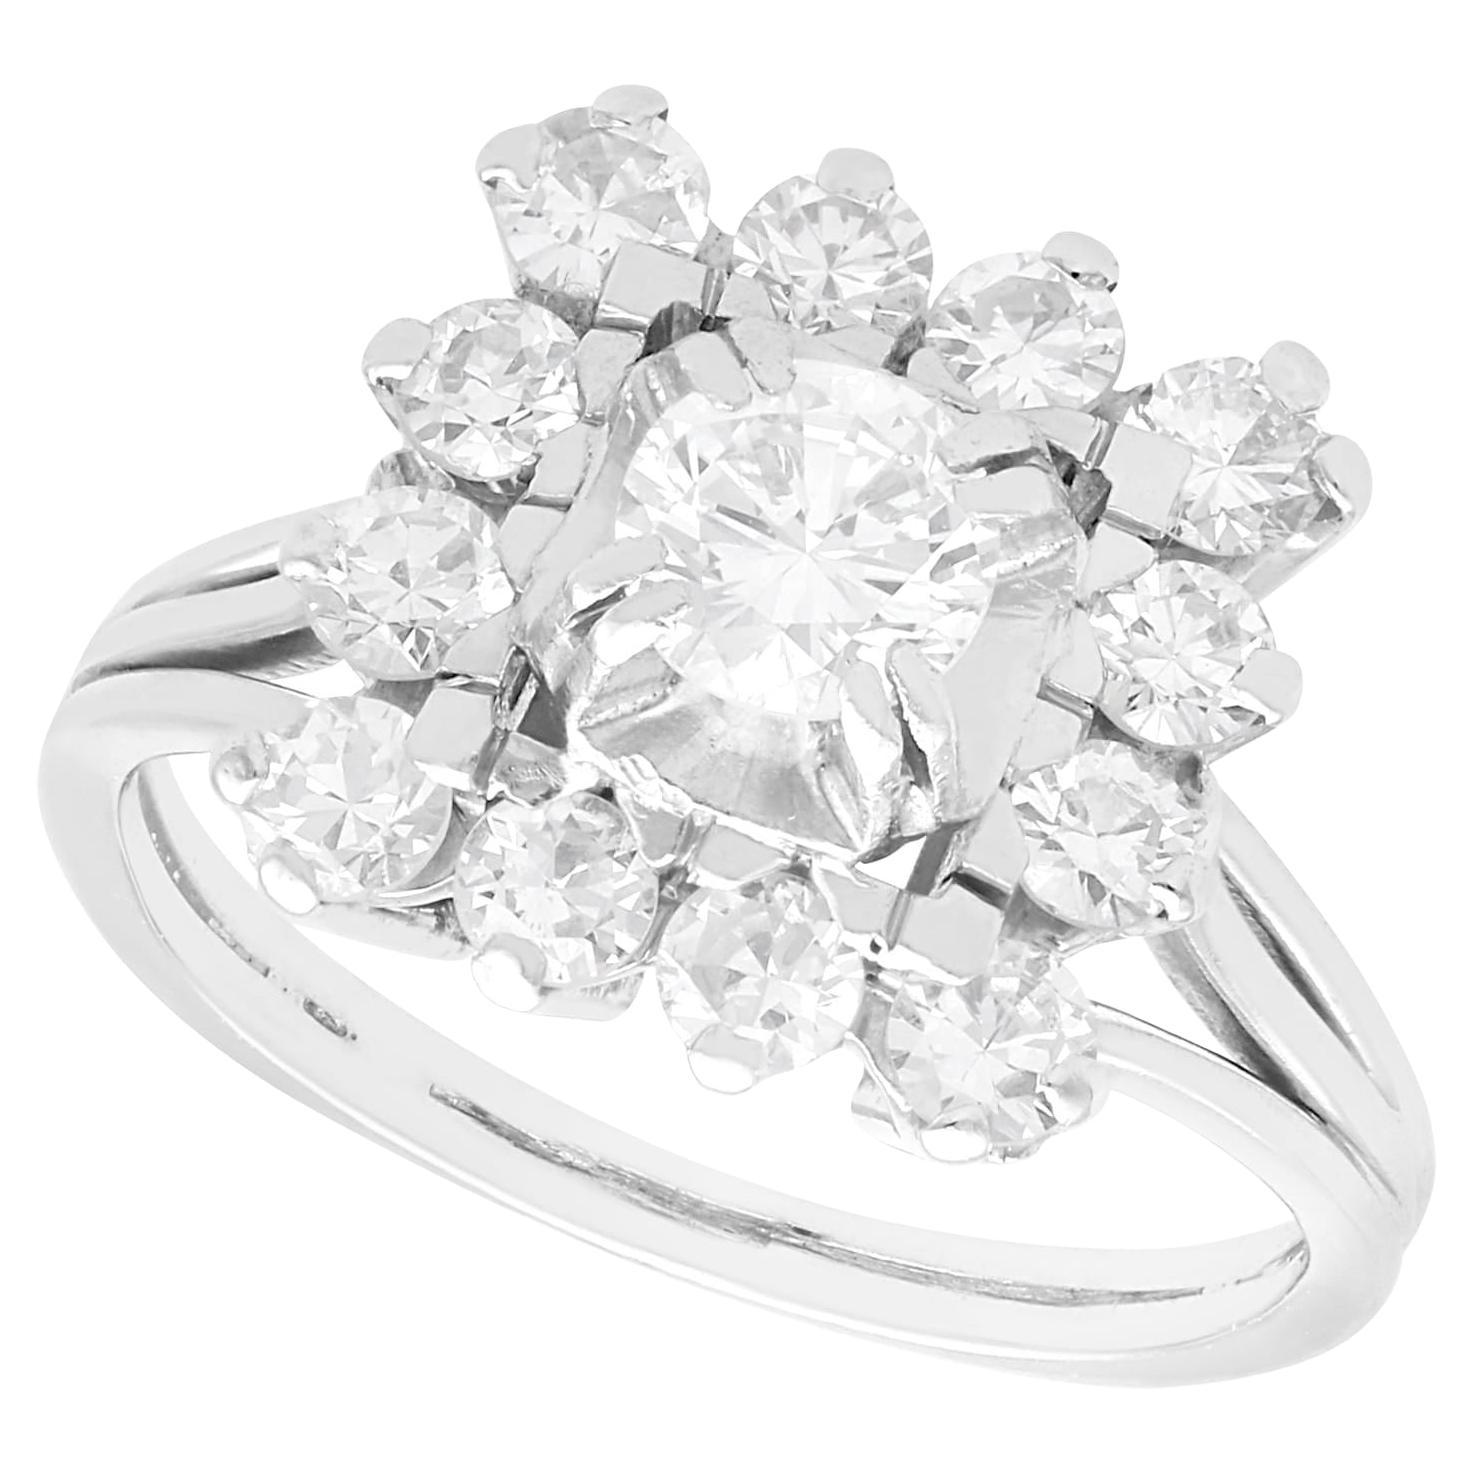 Vintage French 1.51 Carat Diamond and 18k White Gold Cluster Ring For Sale